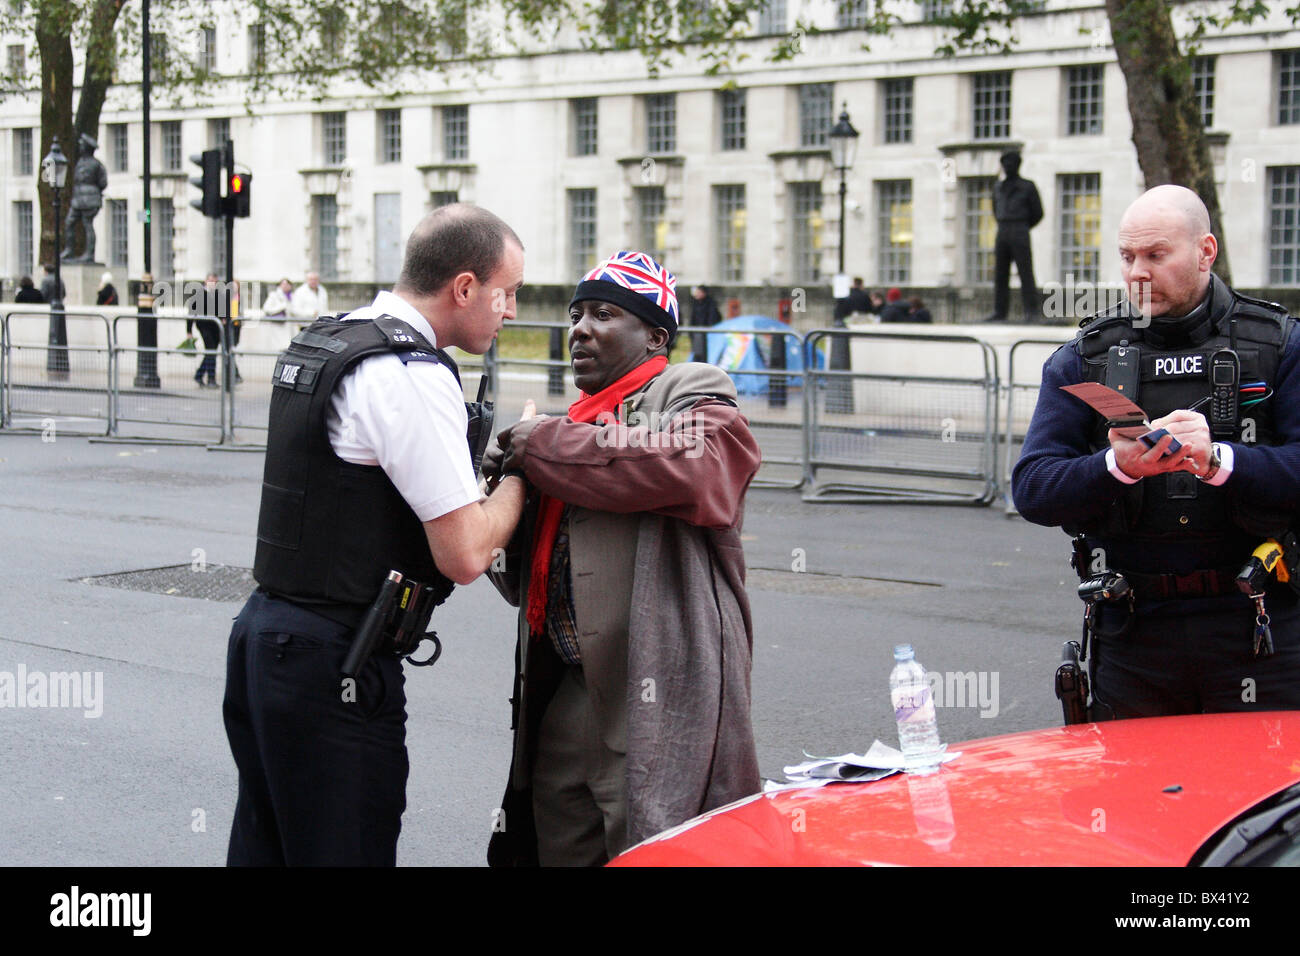 Metropolitan Police DPG officers dealing with a member of public outside Downing Street Stock Photo